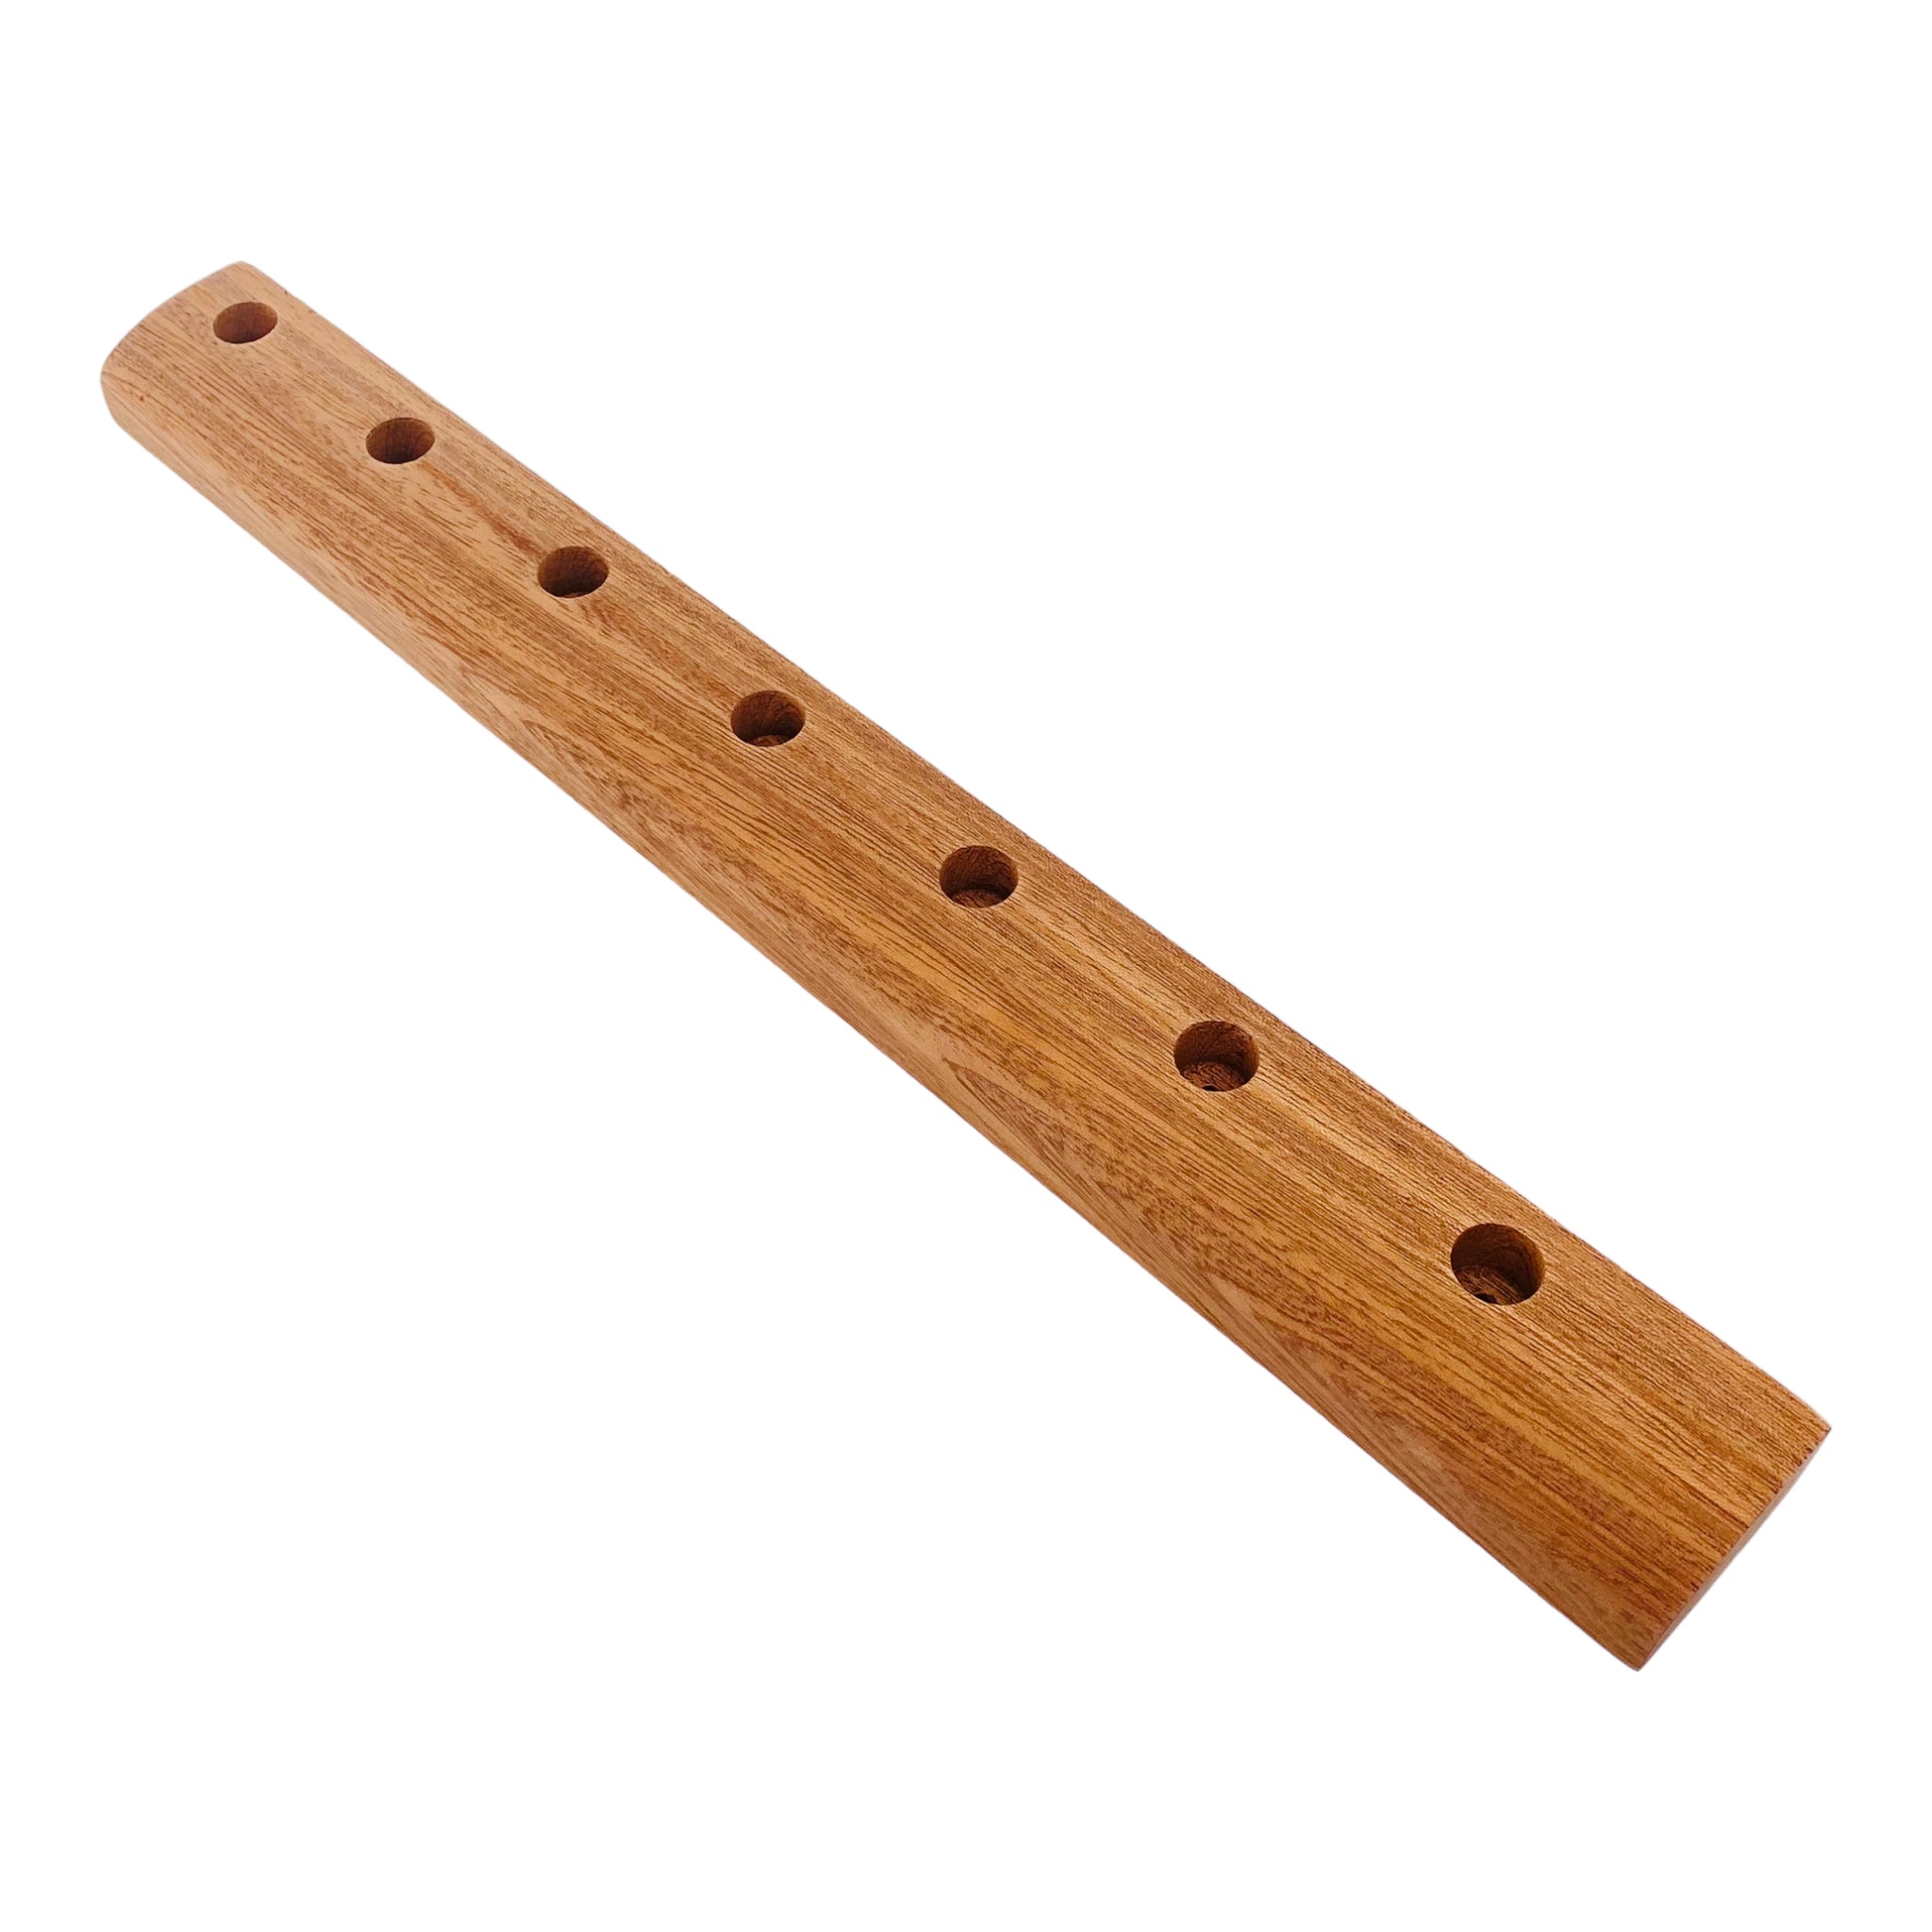 7 Hole Wood Display Stand Holder For 14mm Bong Bowl Pieces Or Quartz Bangers - Mahogany